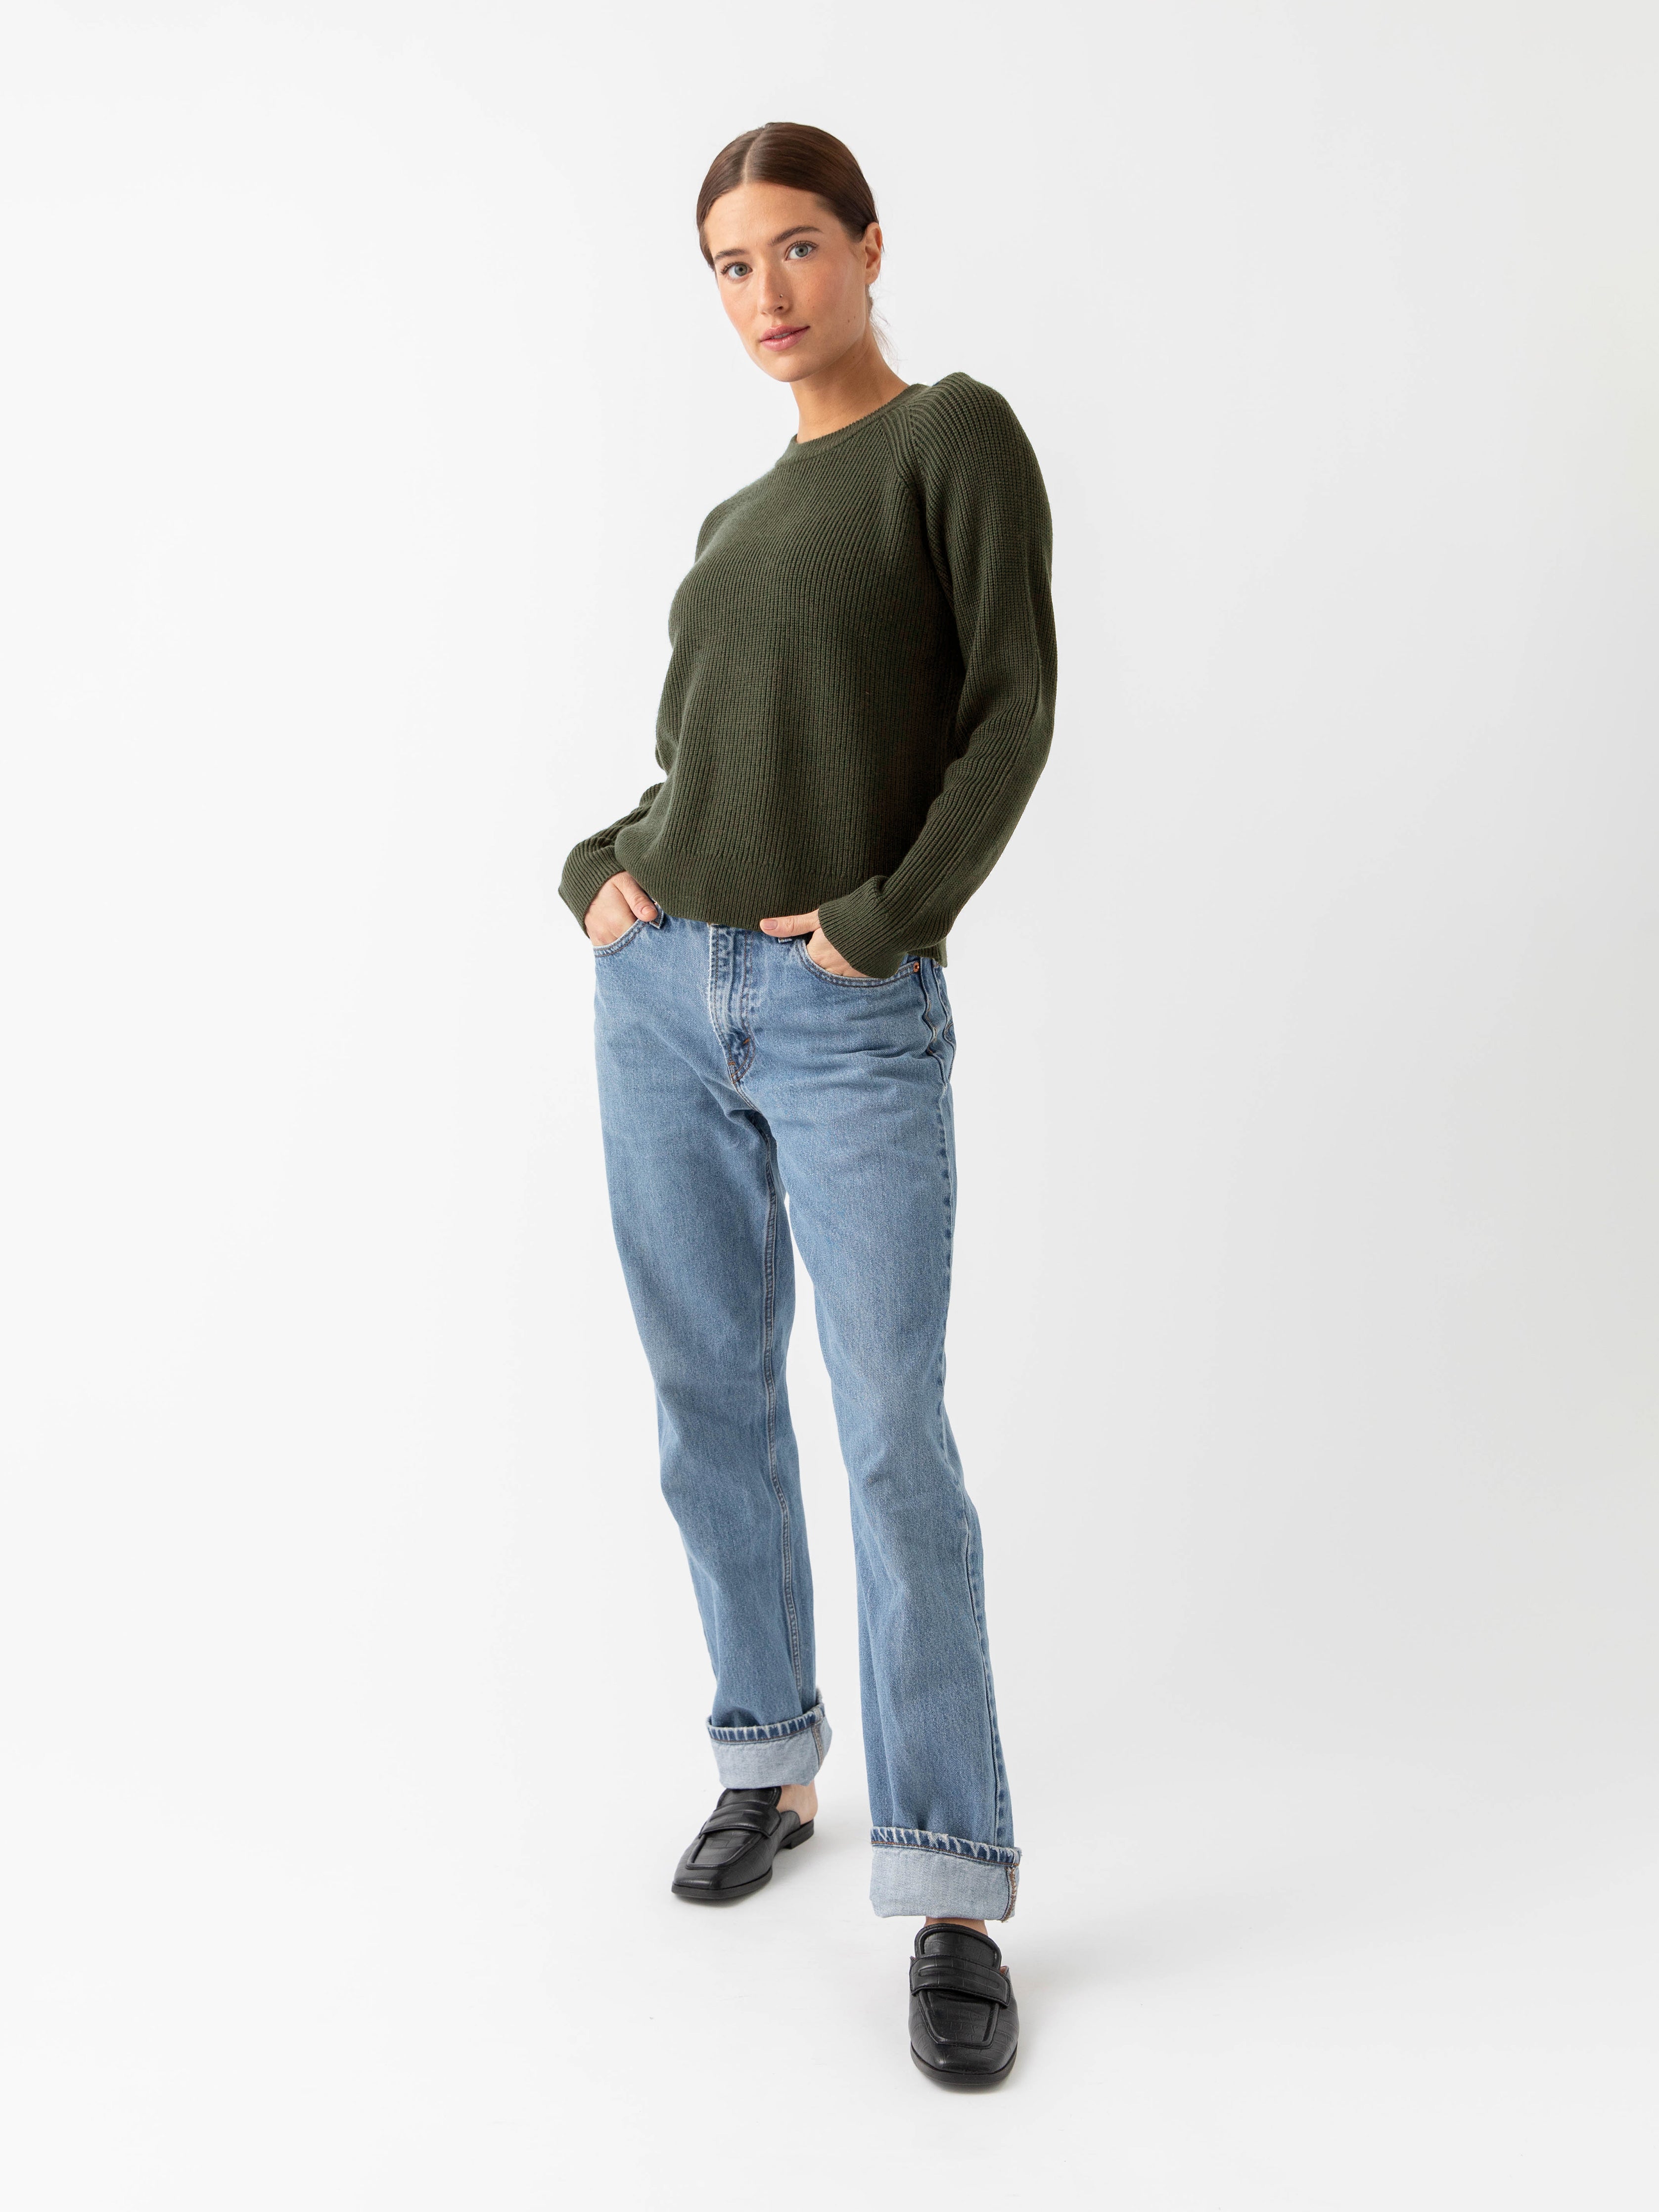 Woman wearing juniper classic crewneck and jeans with white background |Color:Juniper